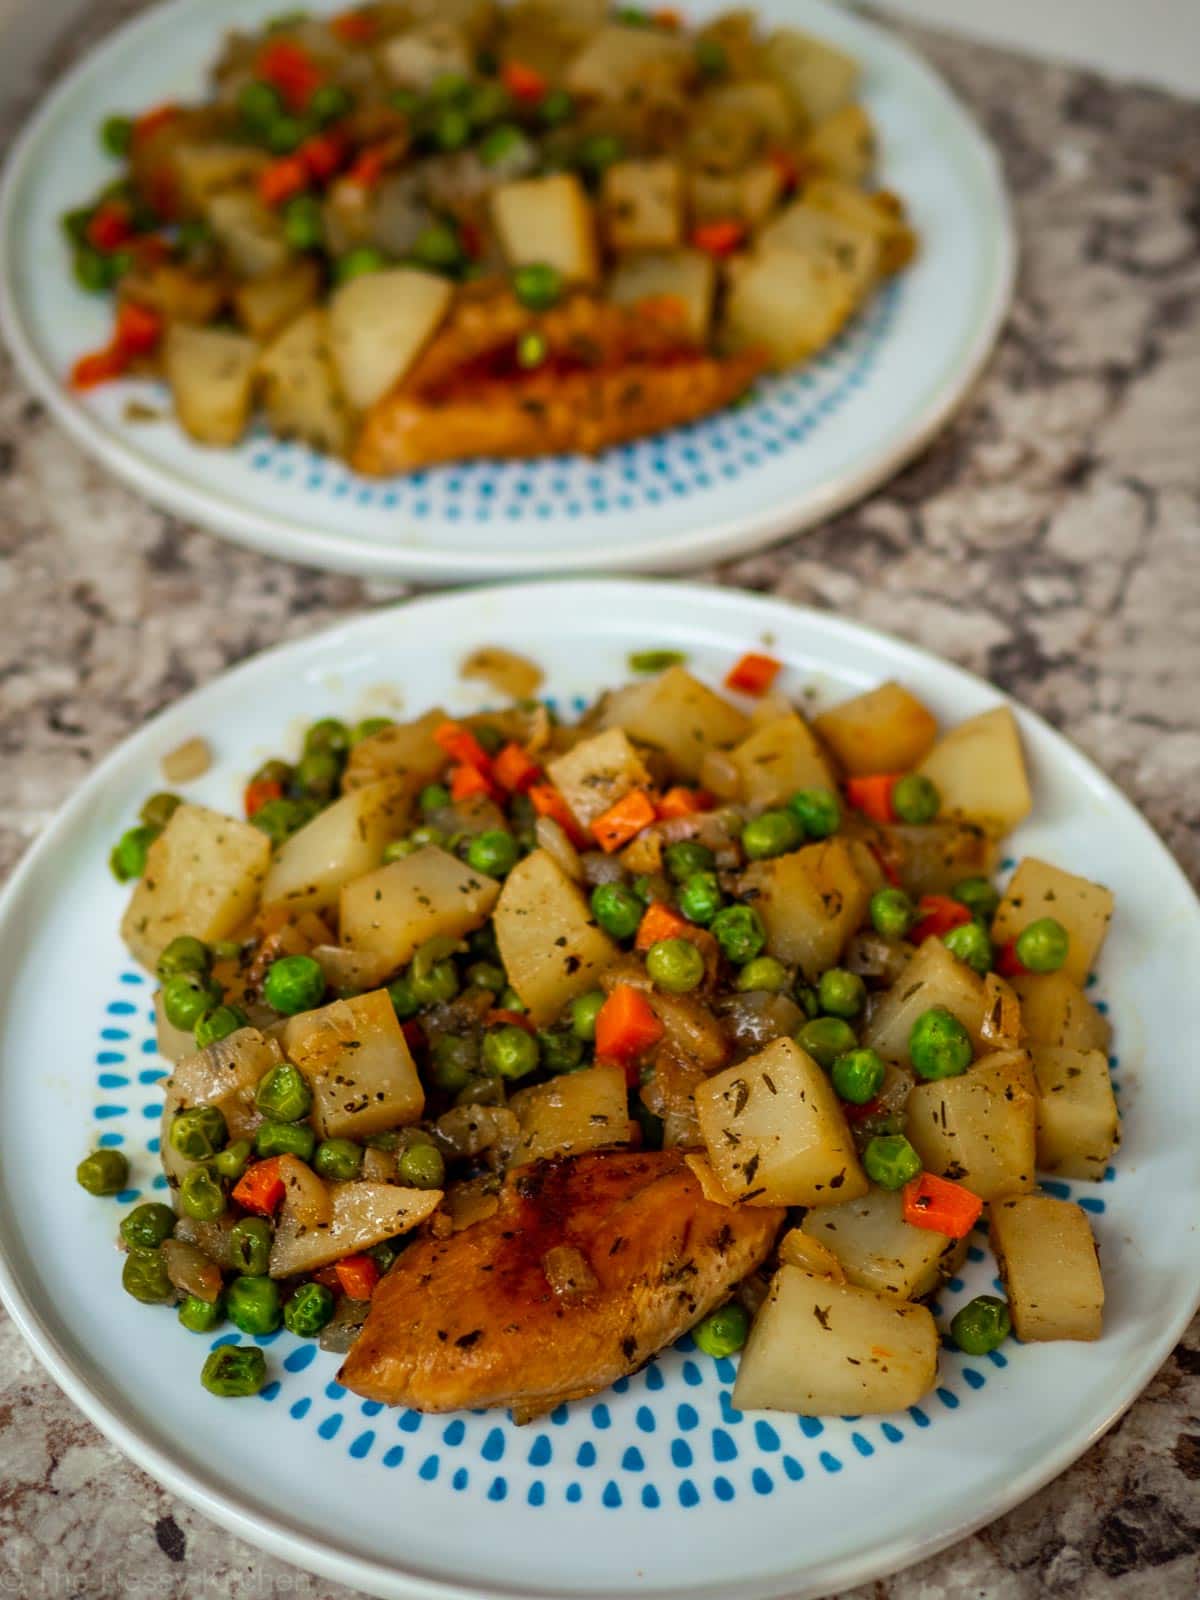 Plate of potatoes, chicken and vegetables.